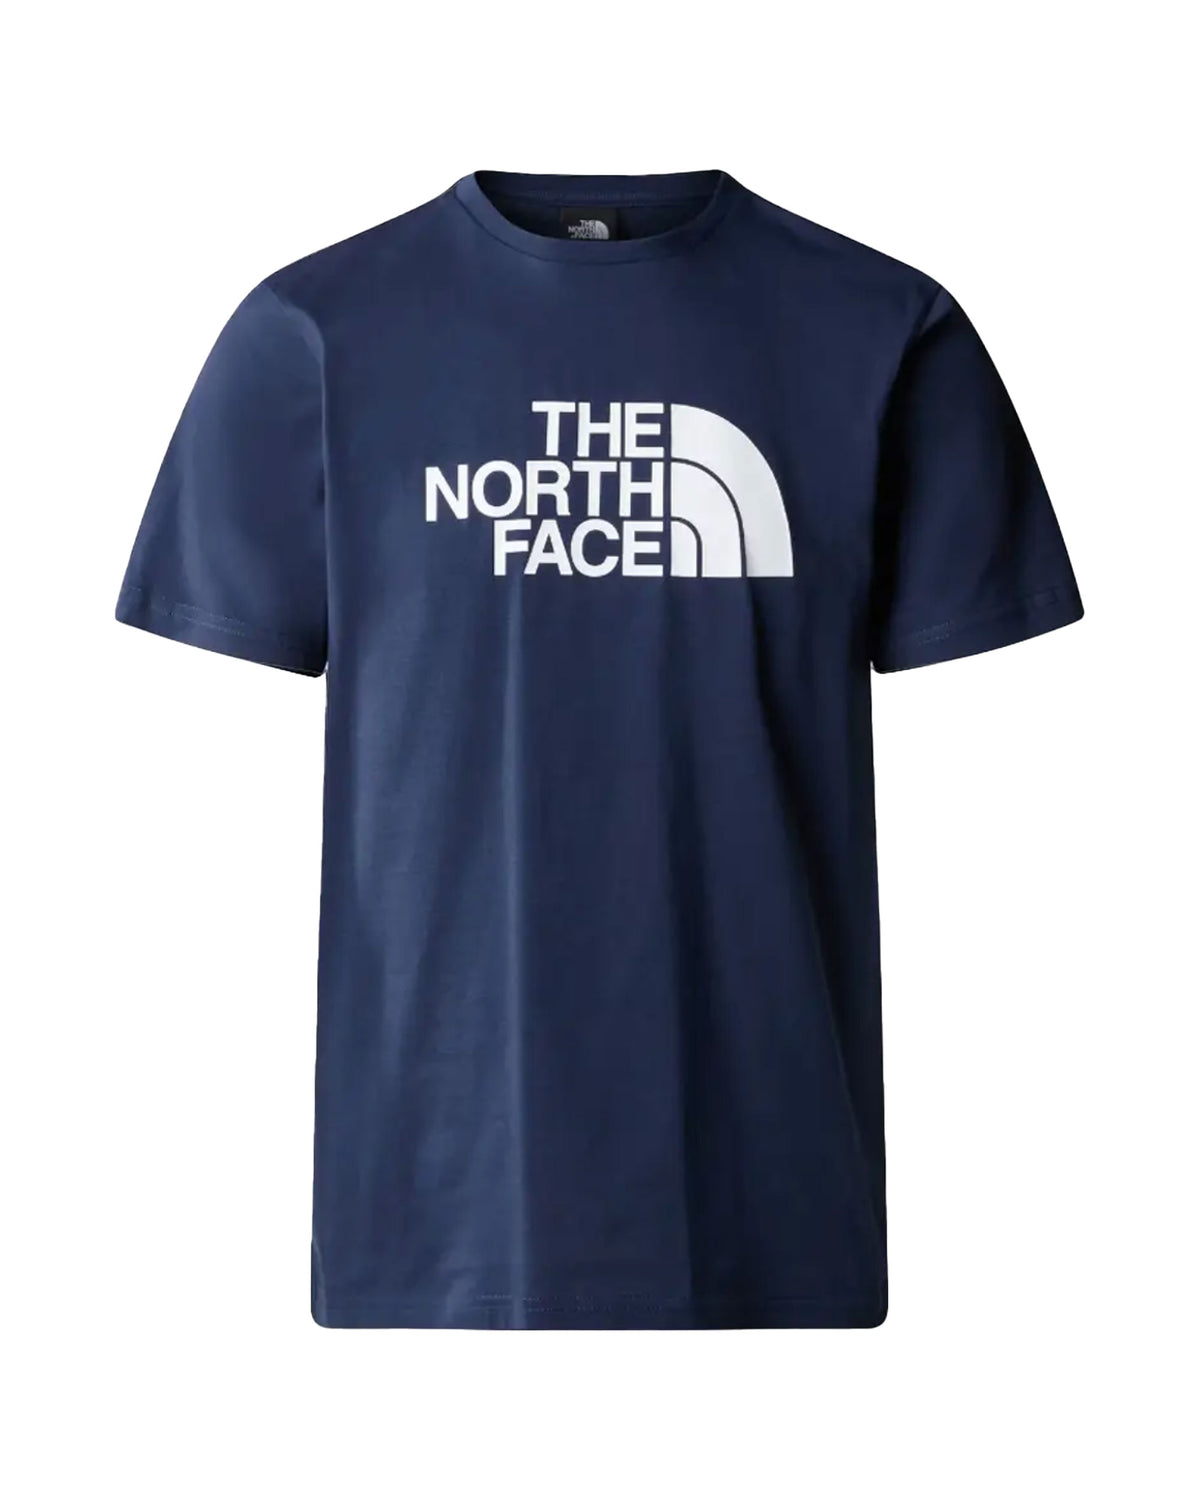 Man Tee The North Face Easy Blue